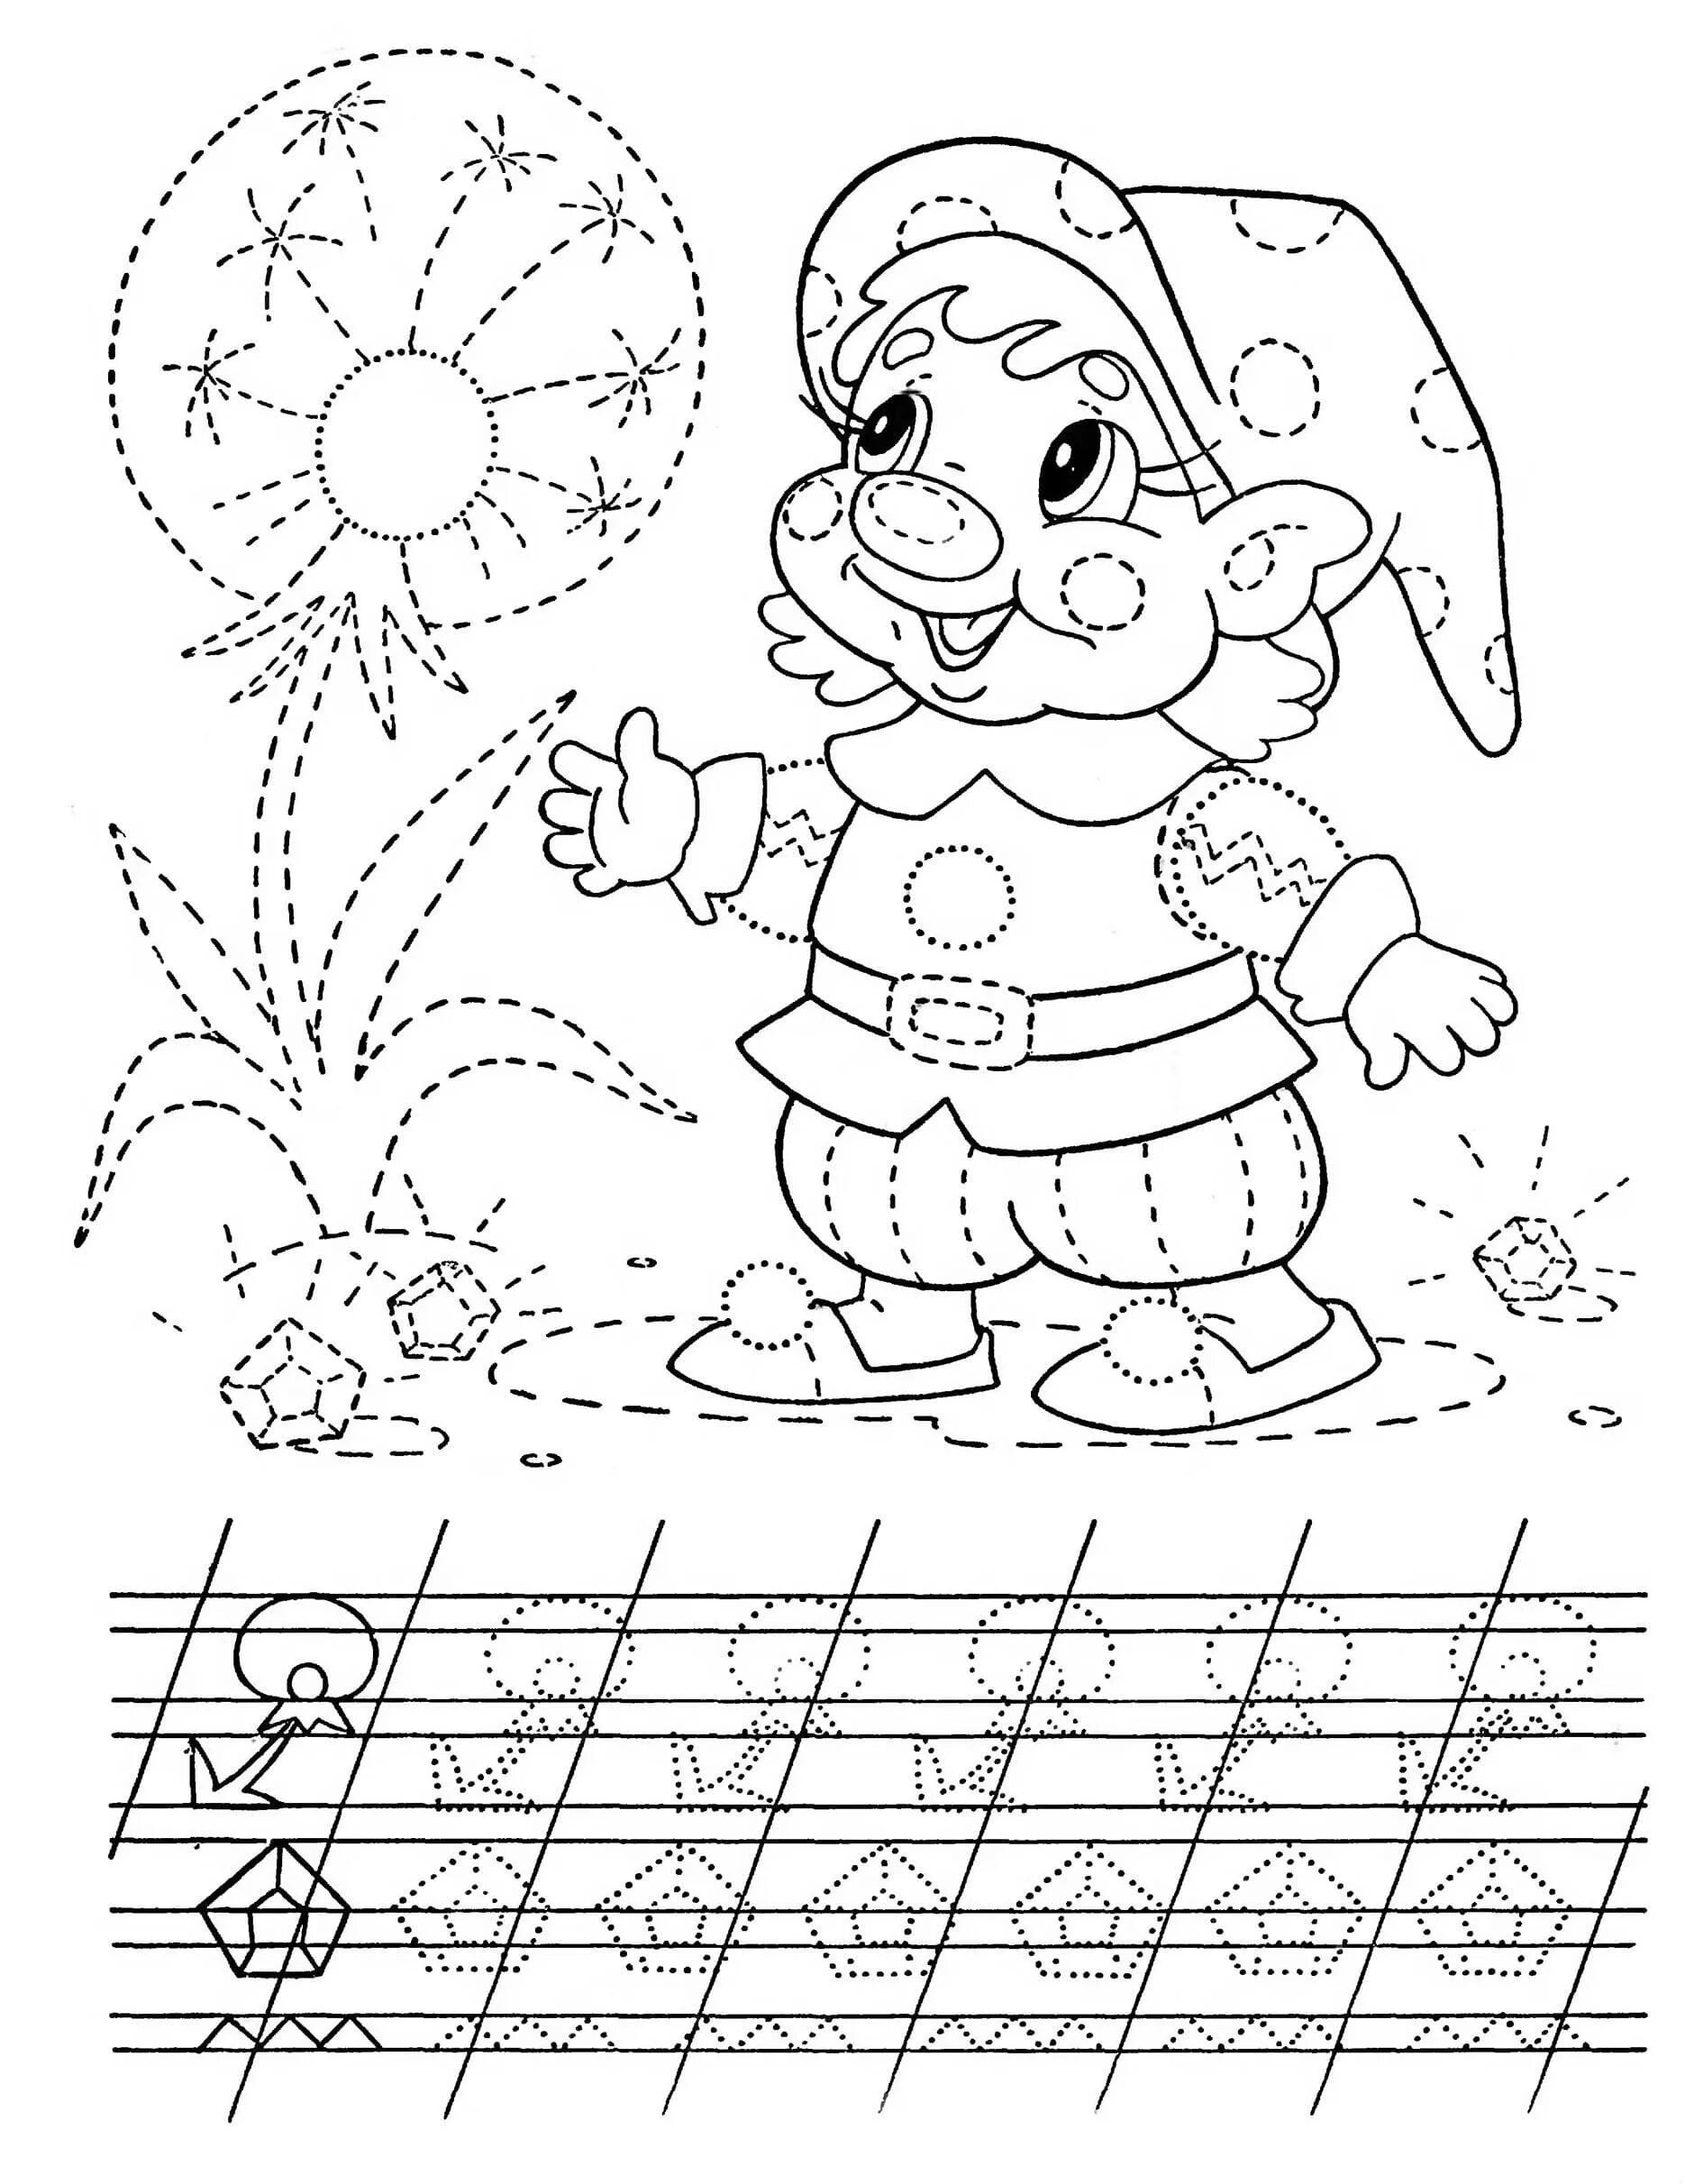 Color-fun prescription coloring page for children 4-5 years old